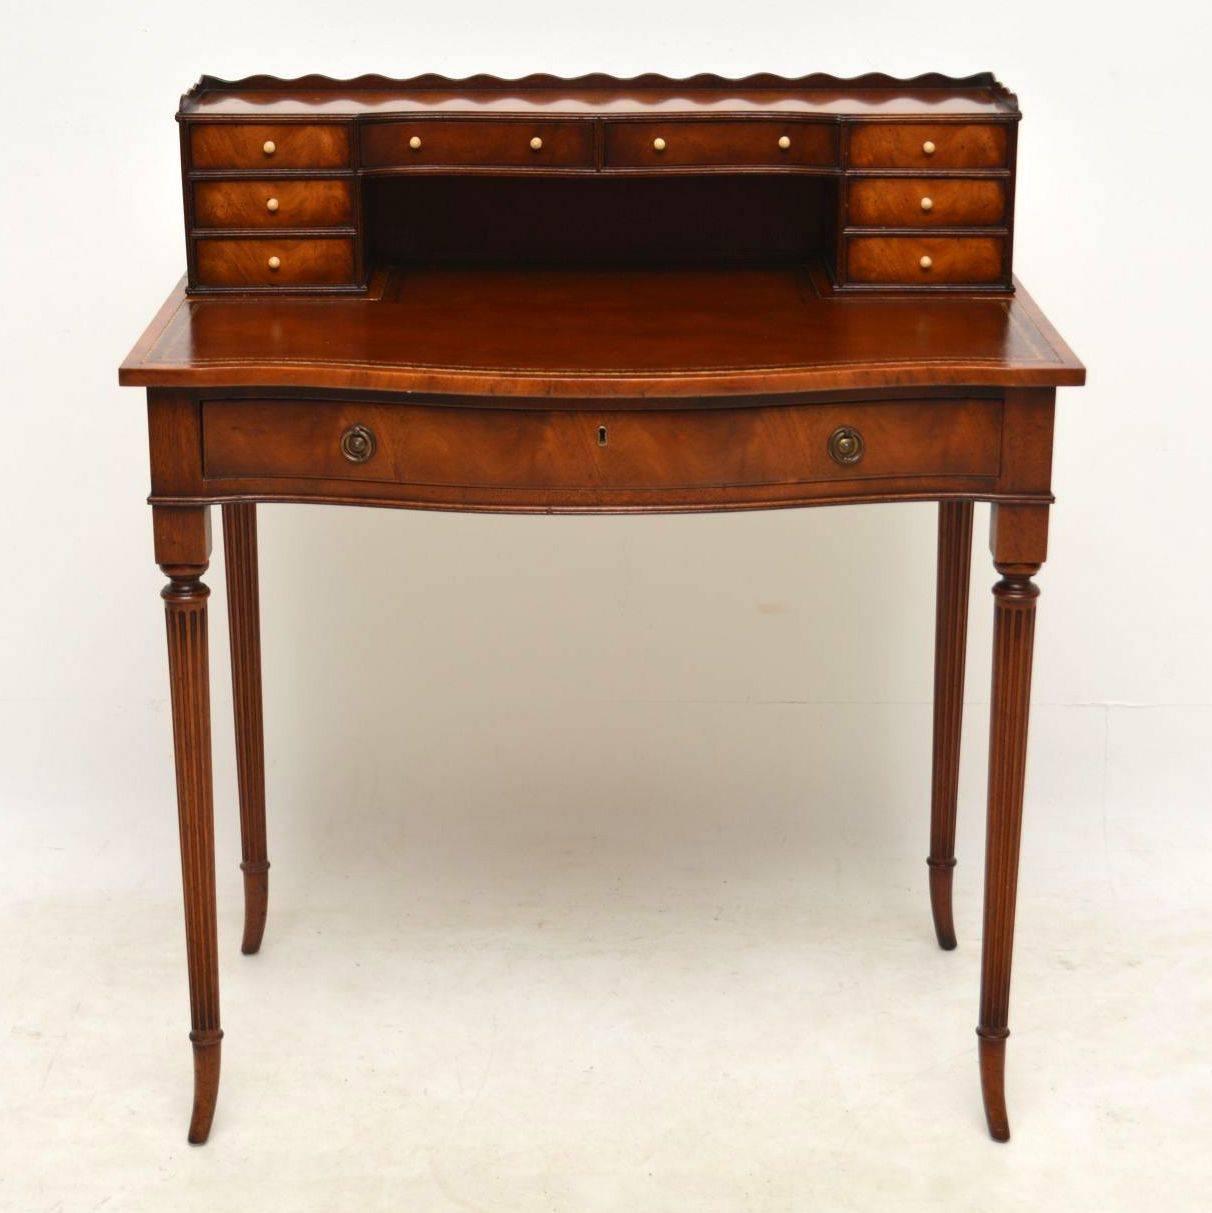 Fine quality antique Sheraton style mahogany Bonheur Du Jour desk in good original condition and dating from circa 1950s period. This exquisite item of furniture has some lovely features and is very elegant too. This desk has a bank of small drawers